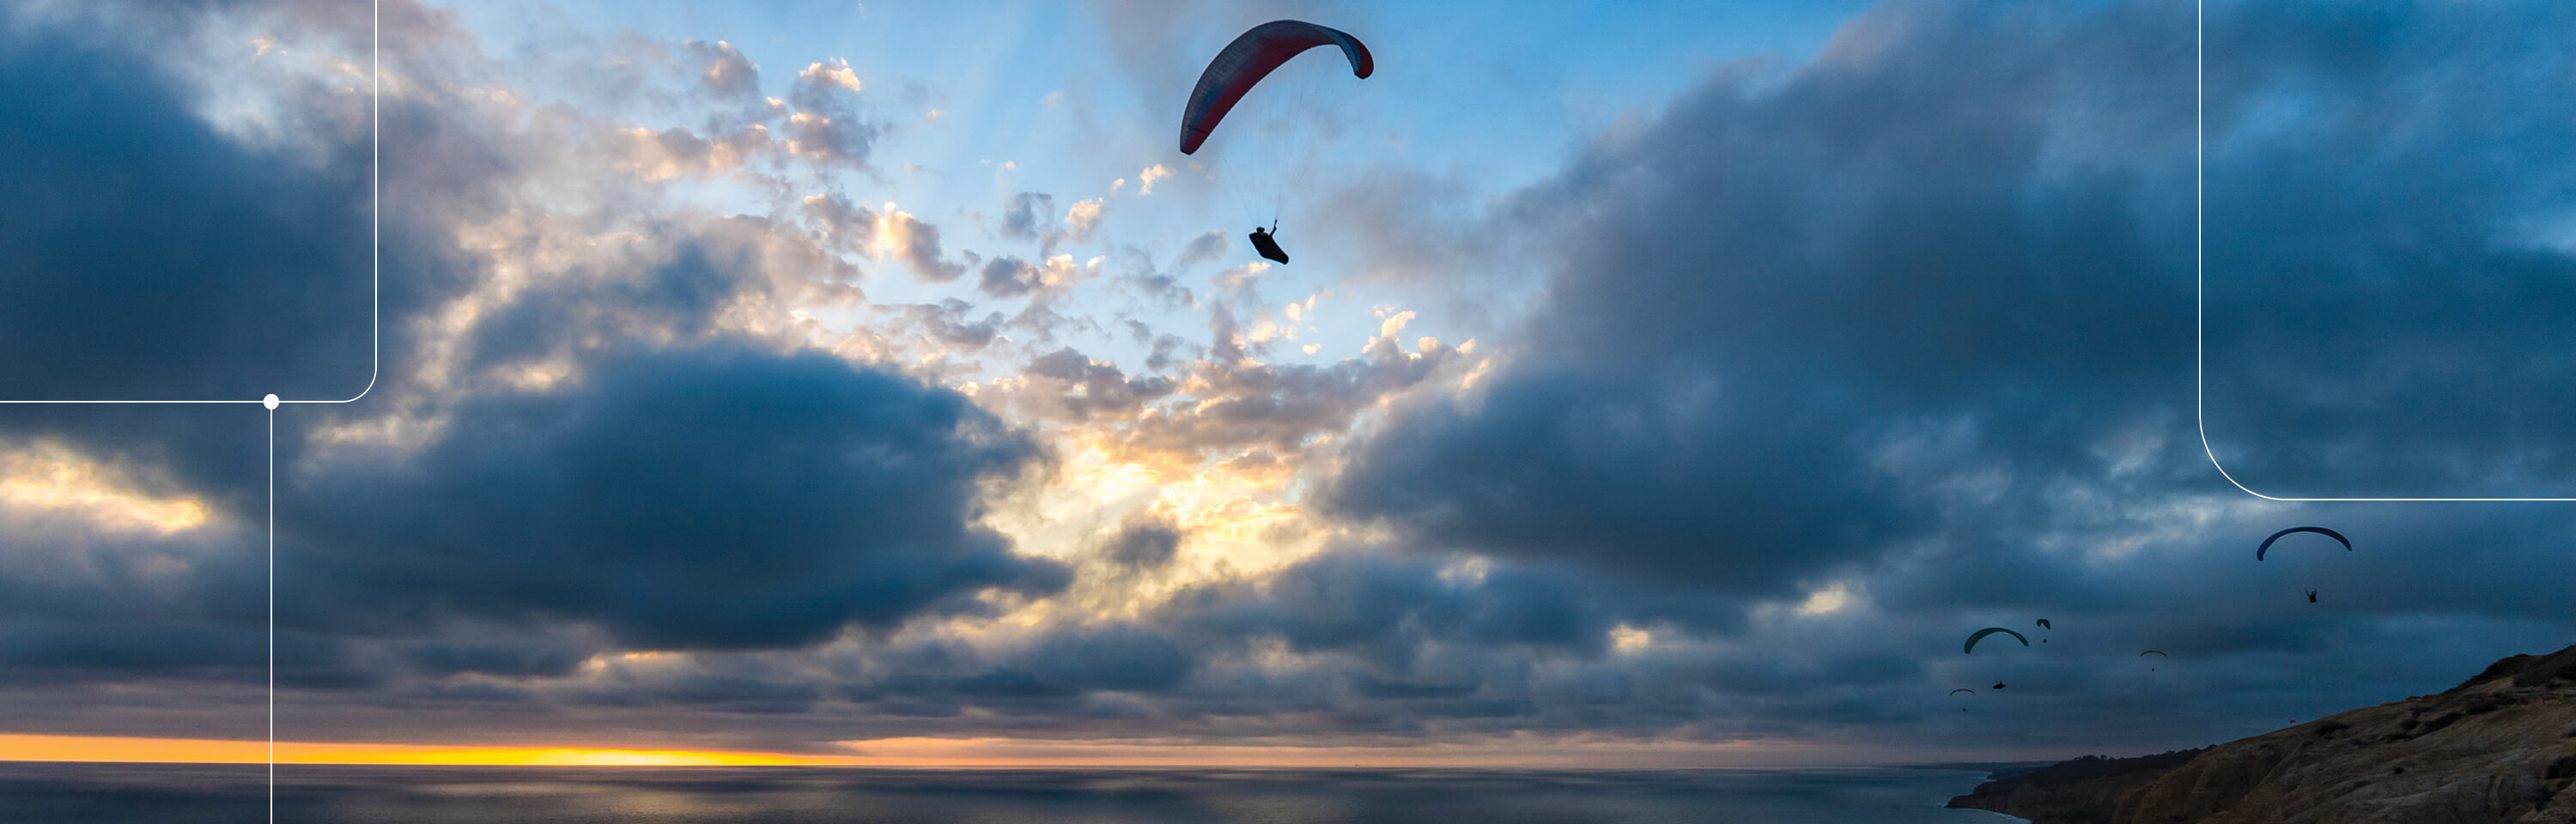 Sunset sky with hang gliders at La Jolla